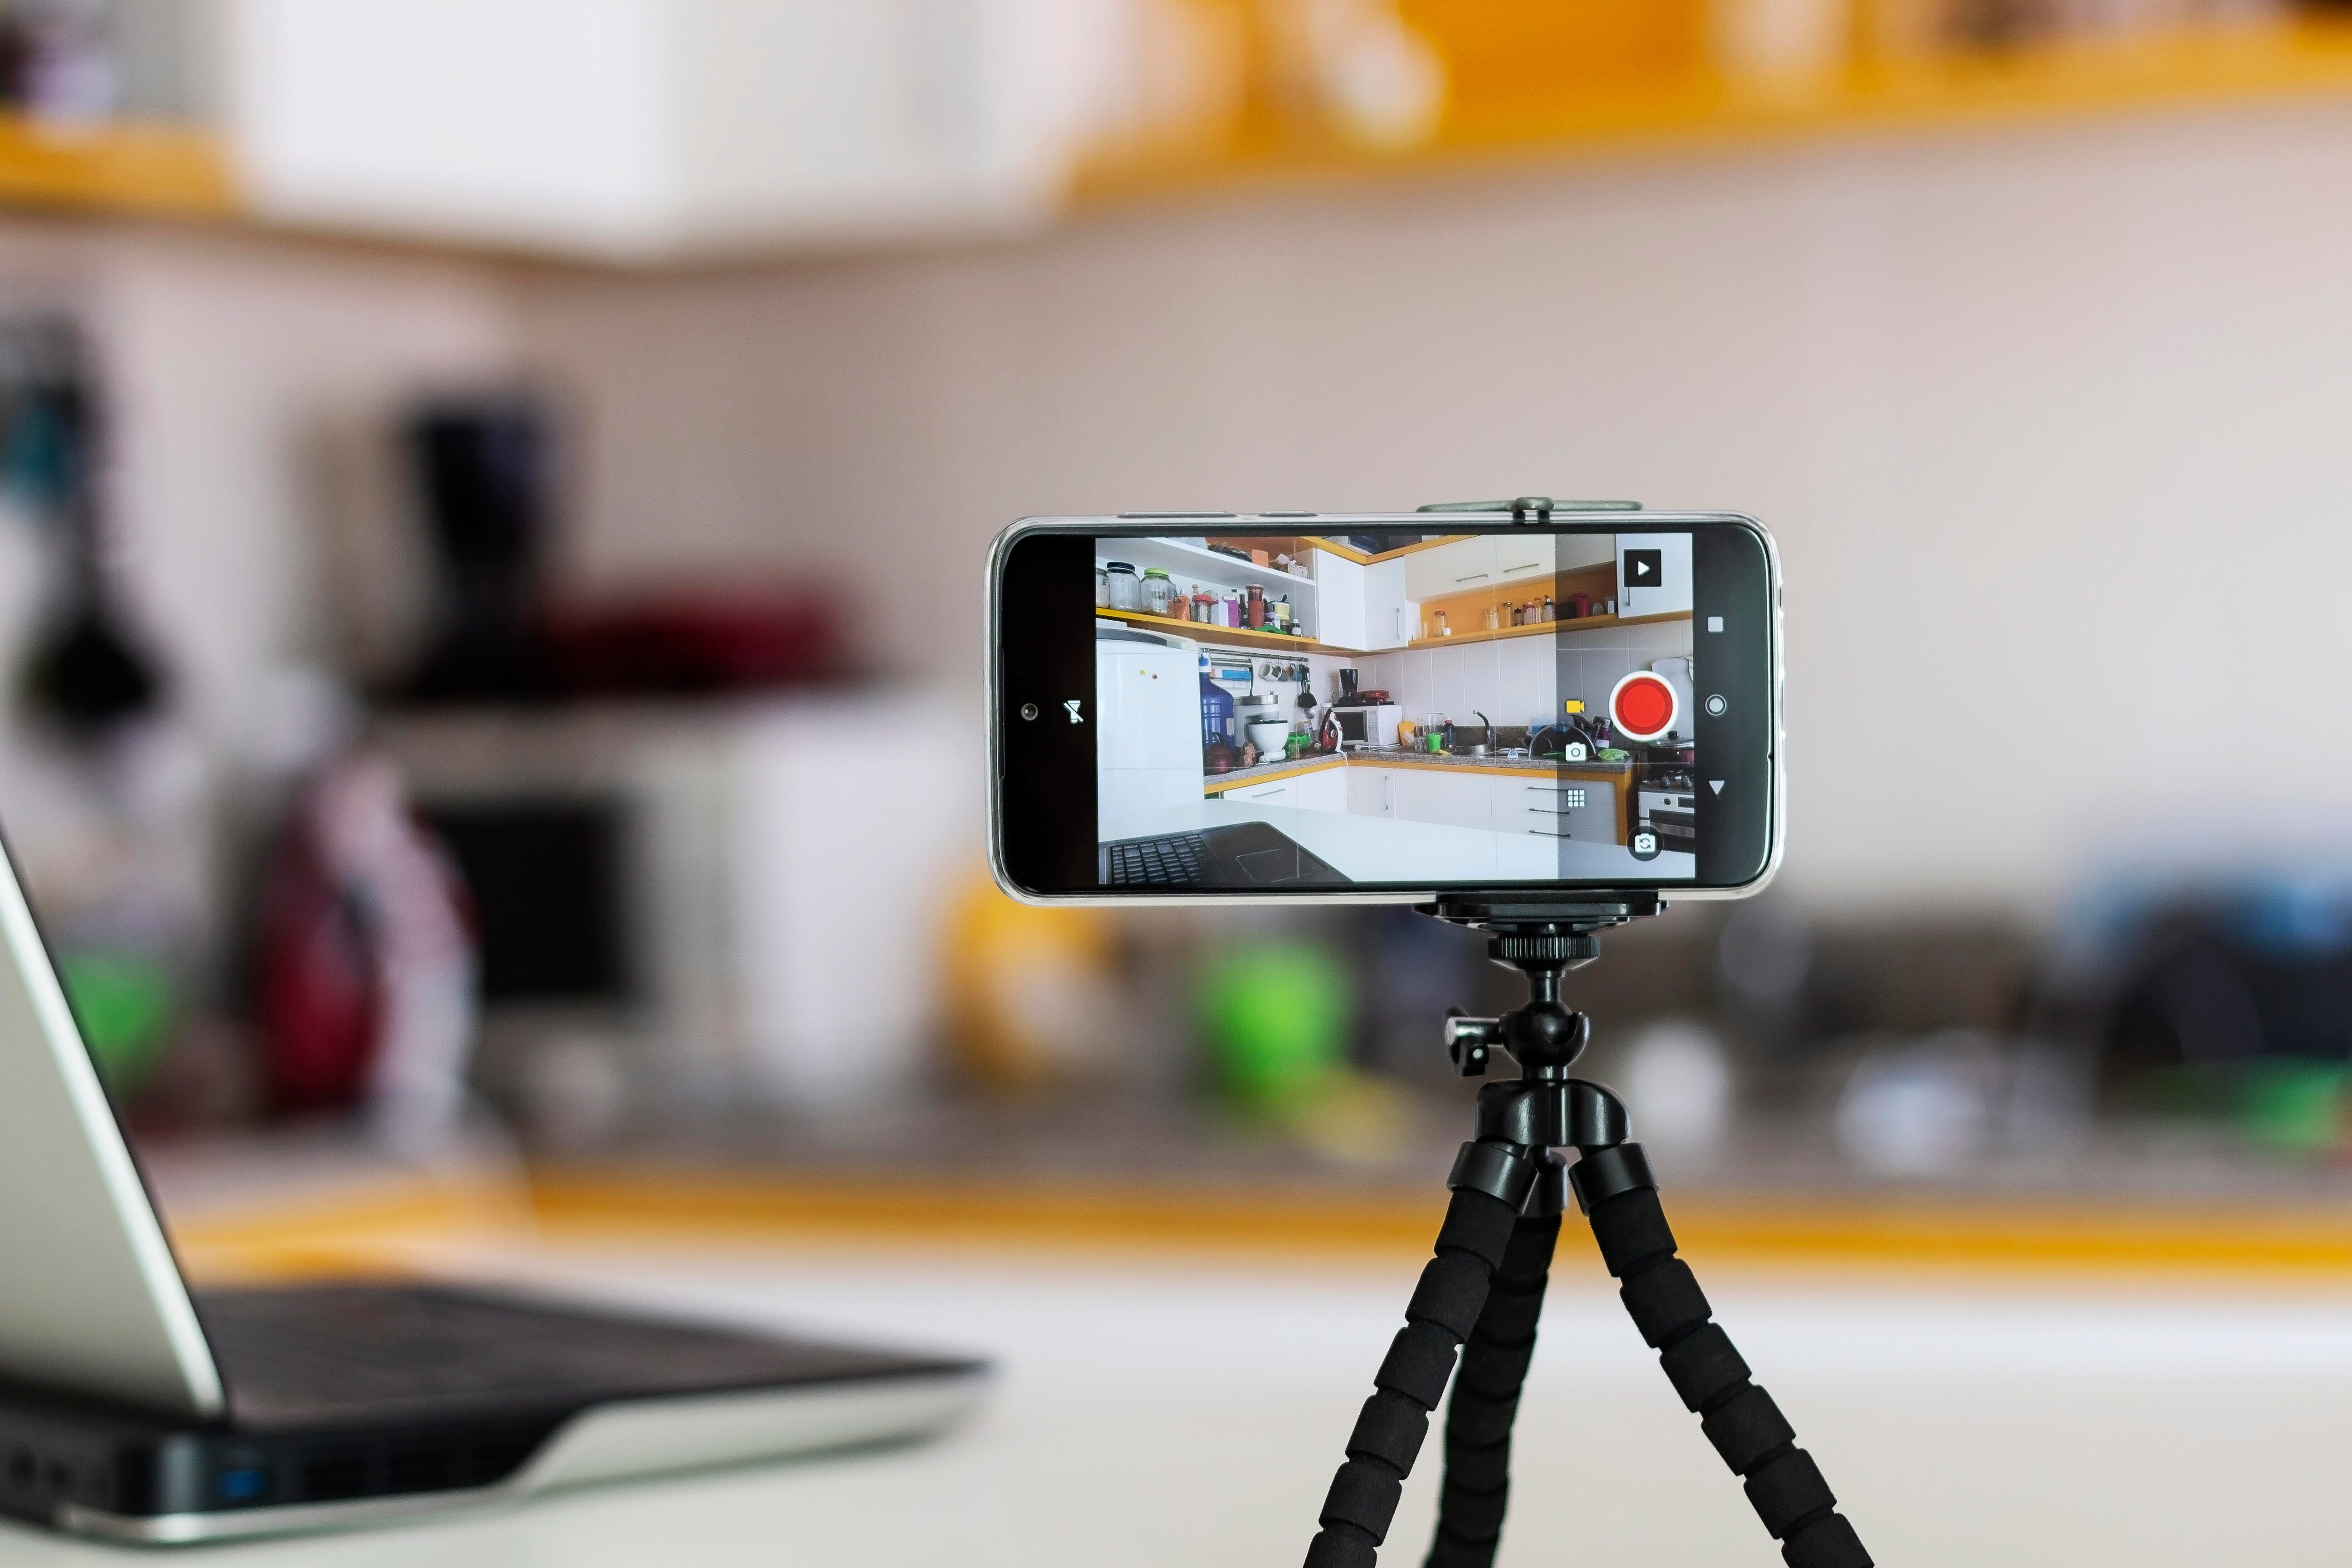 How to use your iPhone or Android as a webcam: It’s actually simple